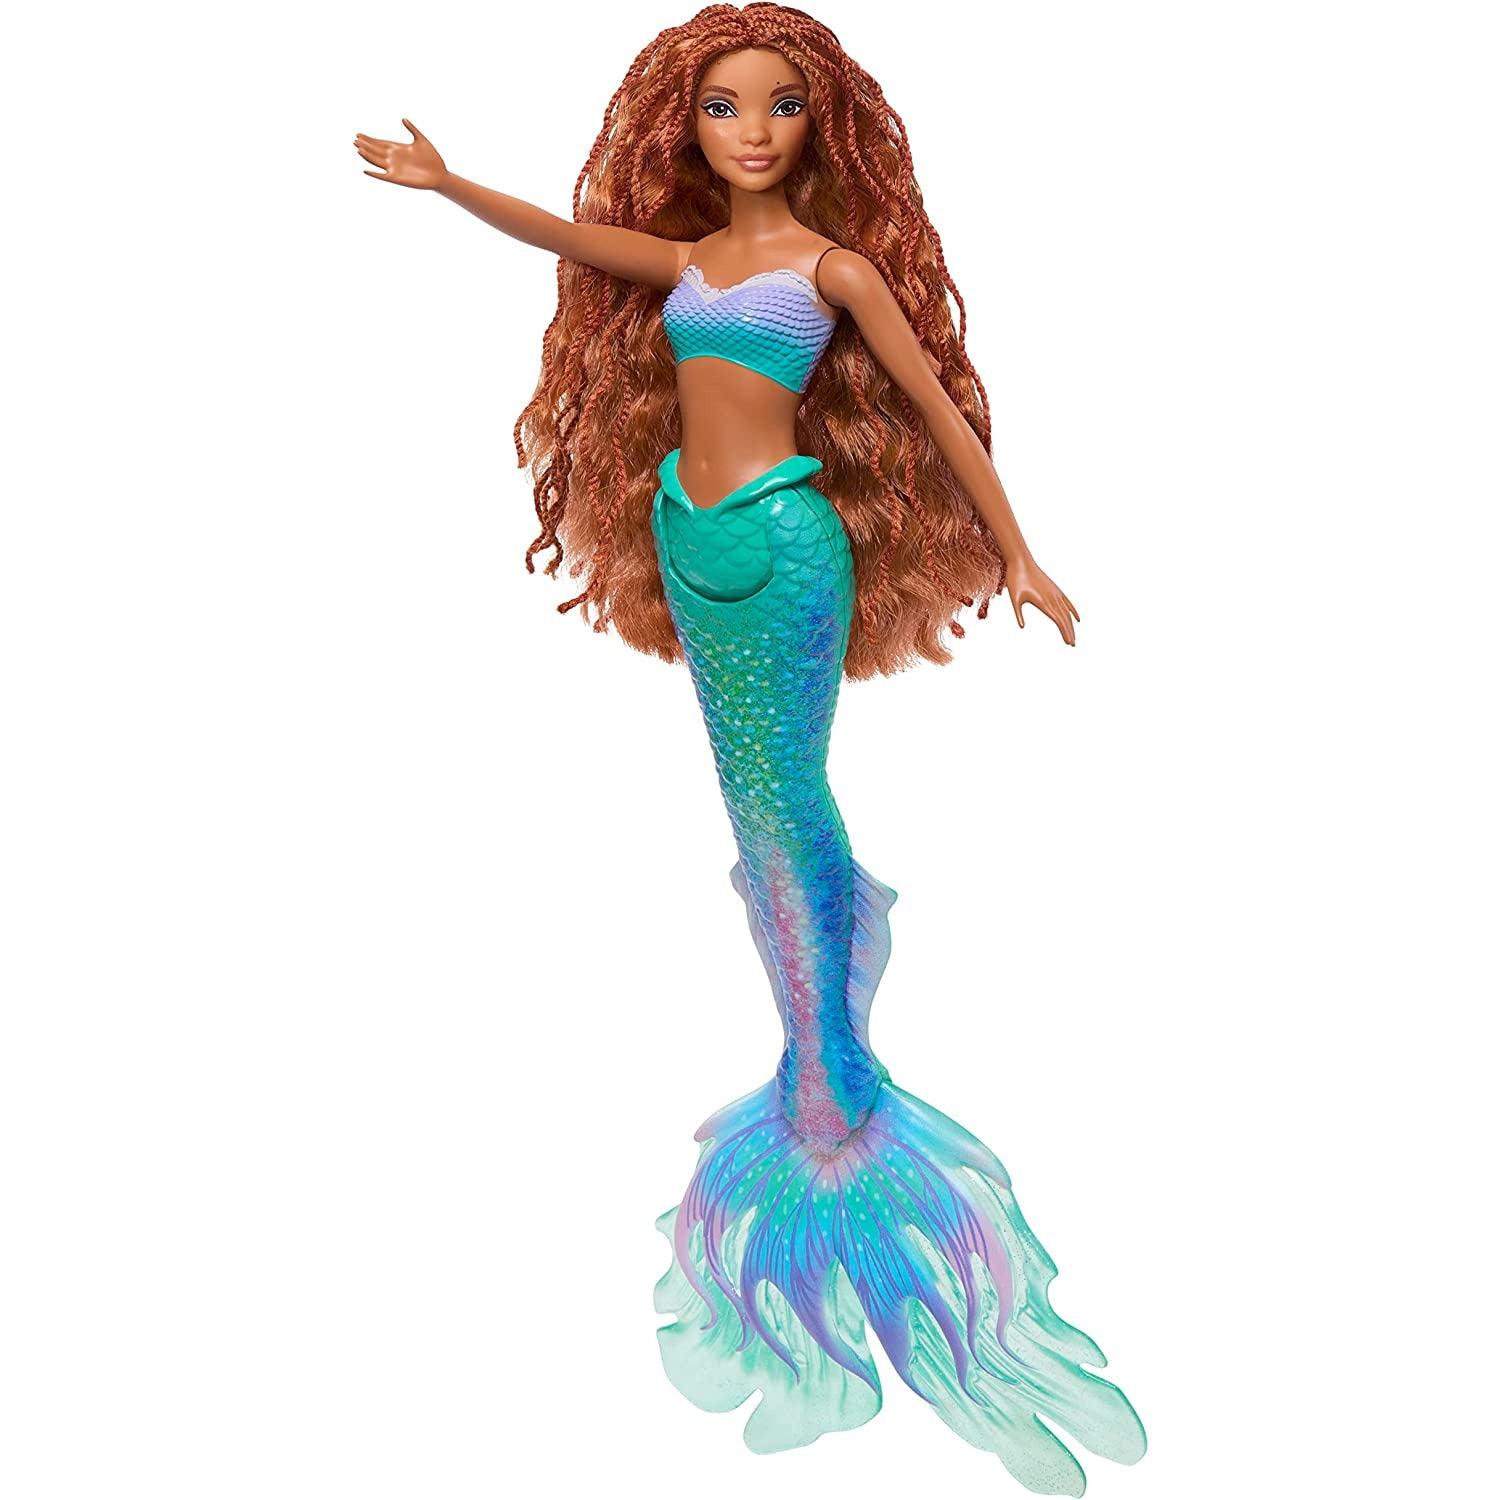 Disney The Little Mermaid Ariel Doll, Mermaid Fashion Doll with Signature Outfit, Toys Inspired by Disney’s The Little Mermaid - BumbleToys - 5-7 Years, Fashion Dolls & Accessories, Girls, Mermaid, Pre-Order